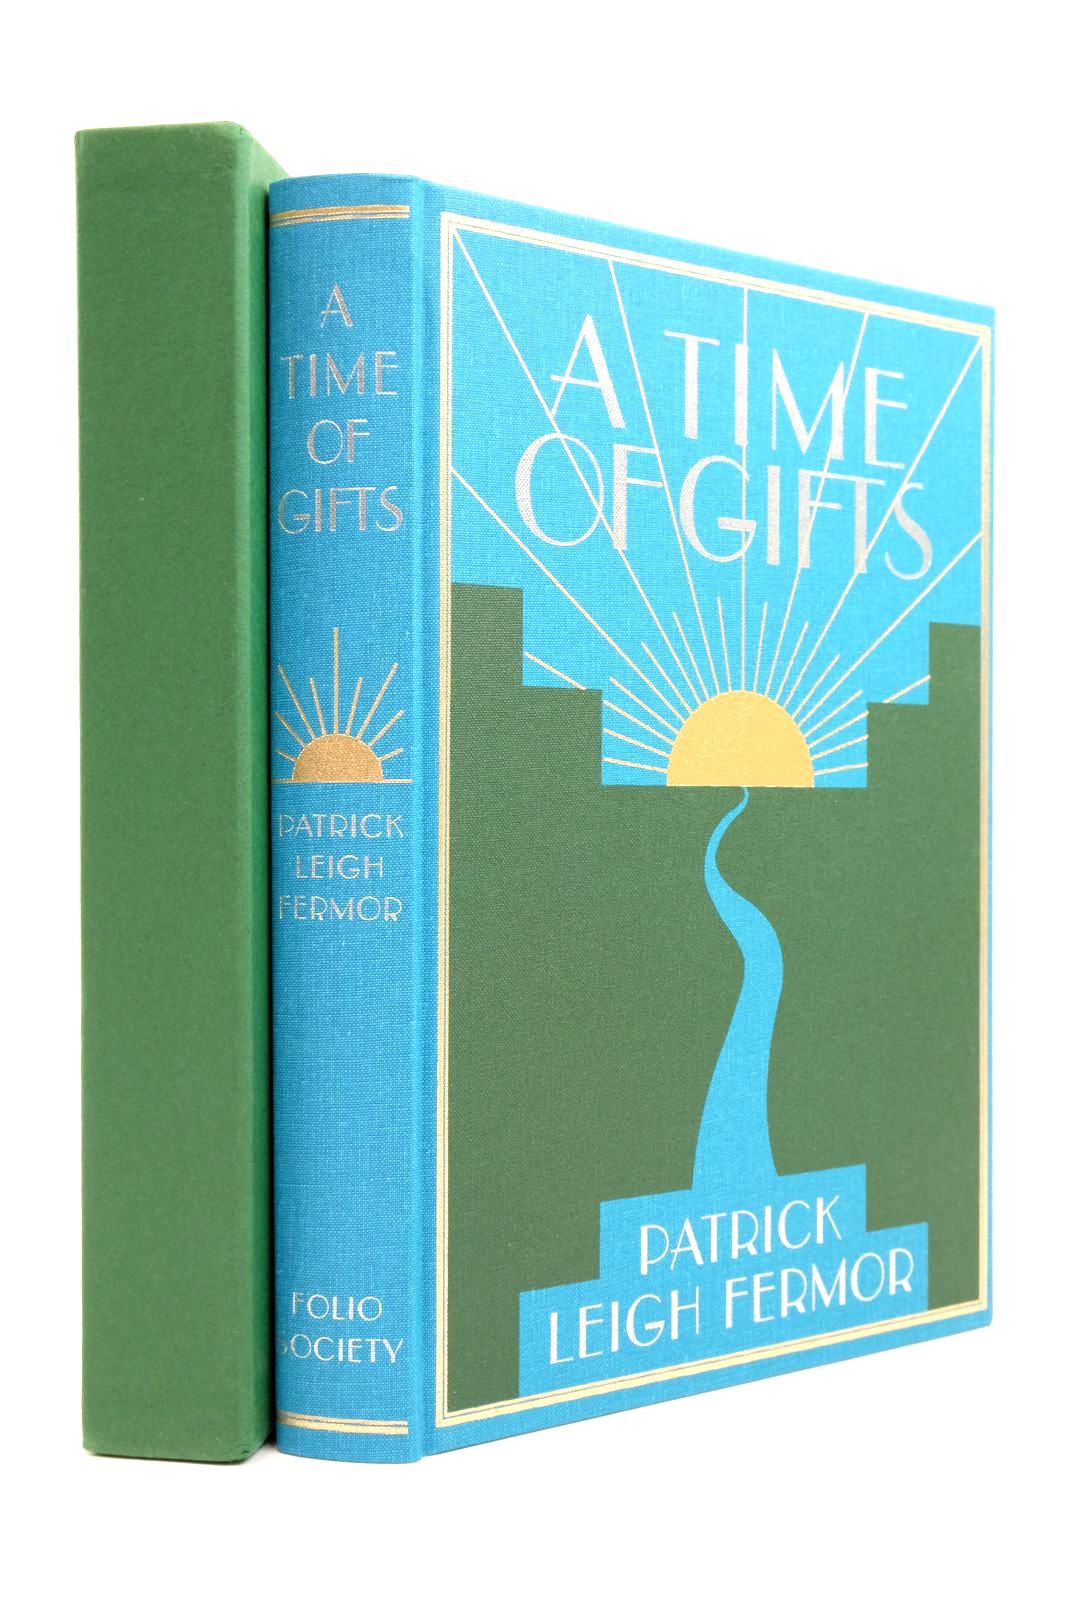 Photo of A TIME OF GIFTS written by Fermor, Patrick Leigh illustrated by Whistler, Daniel published by Folio Society (STOCK CODE: 2138790)  for sale by Stella & Rose's Books